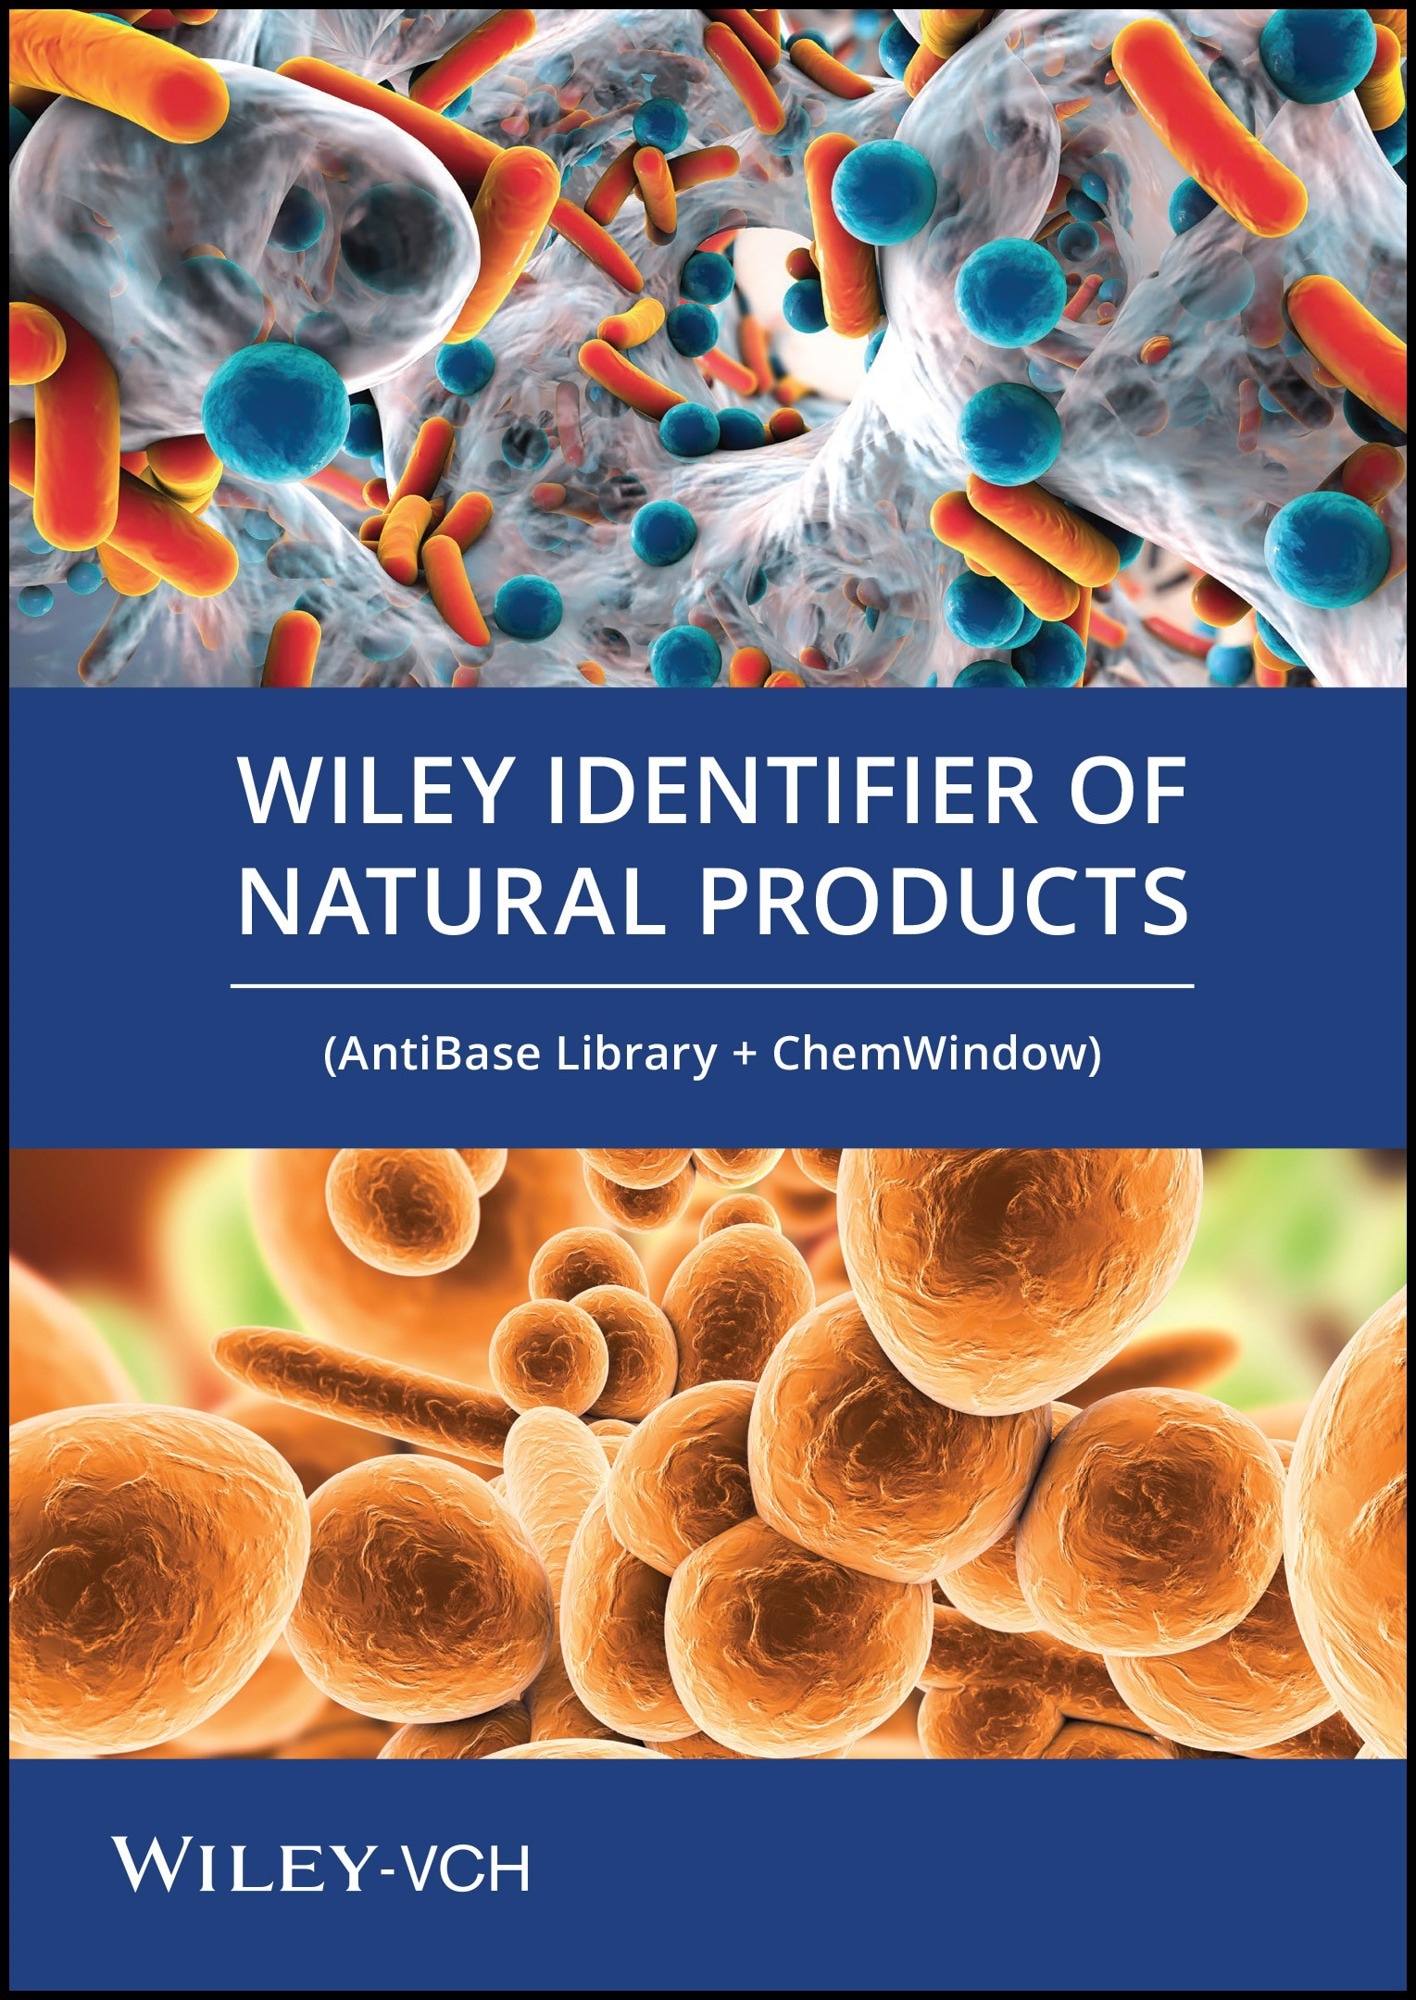 Wiley's Latest Natural Products Database Release Empowers Drug Discovery and Research